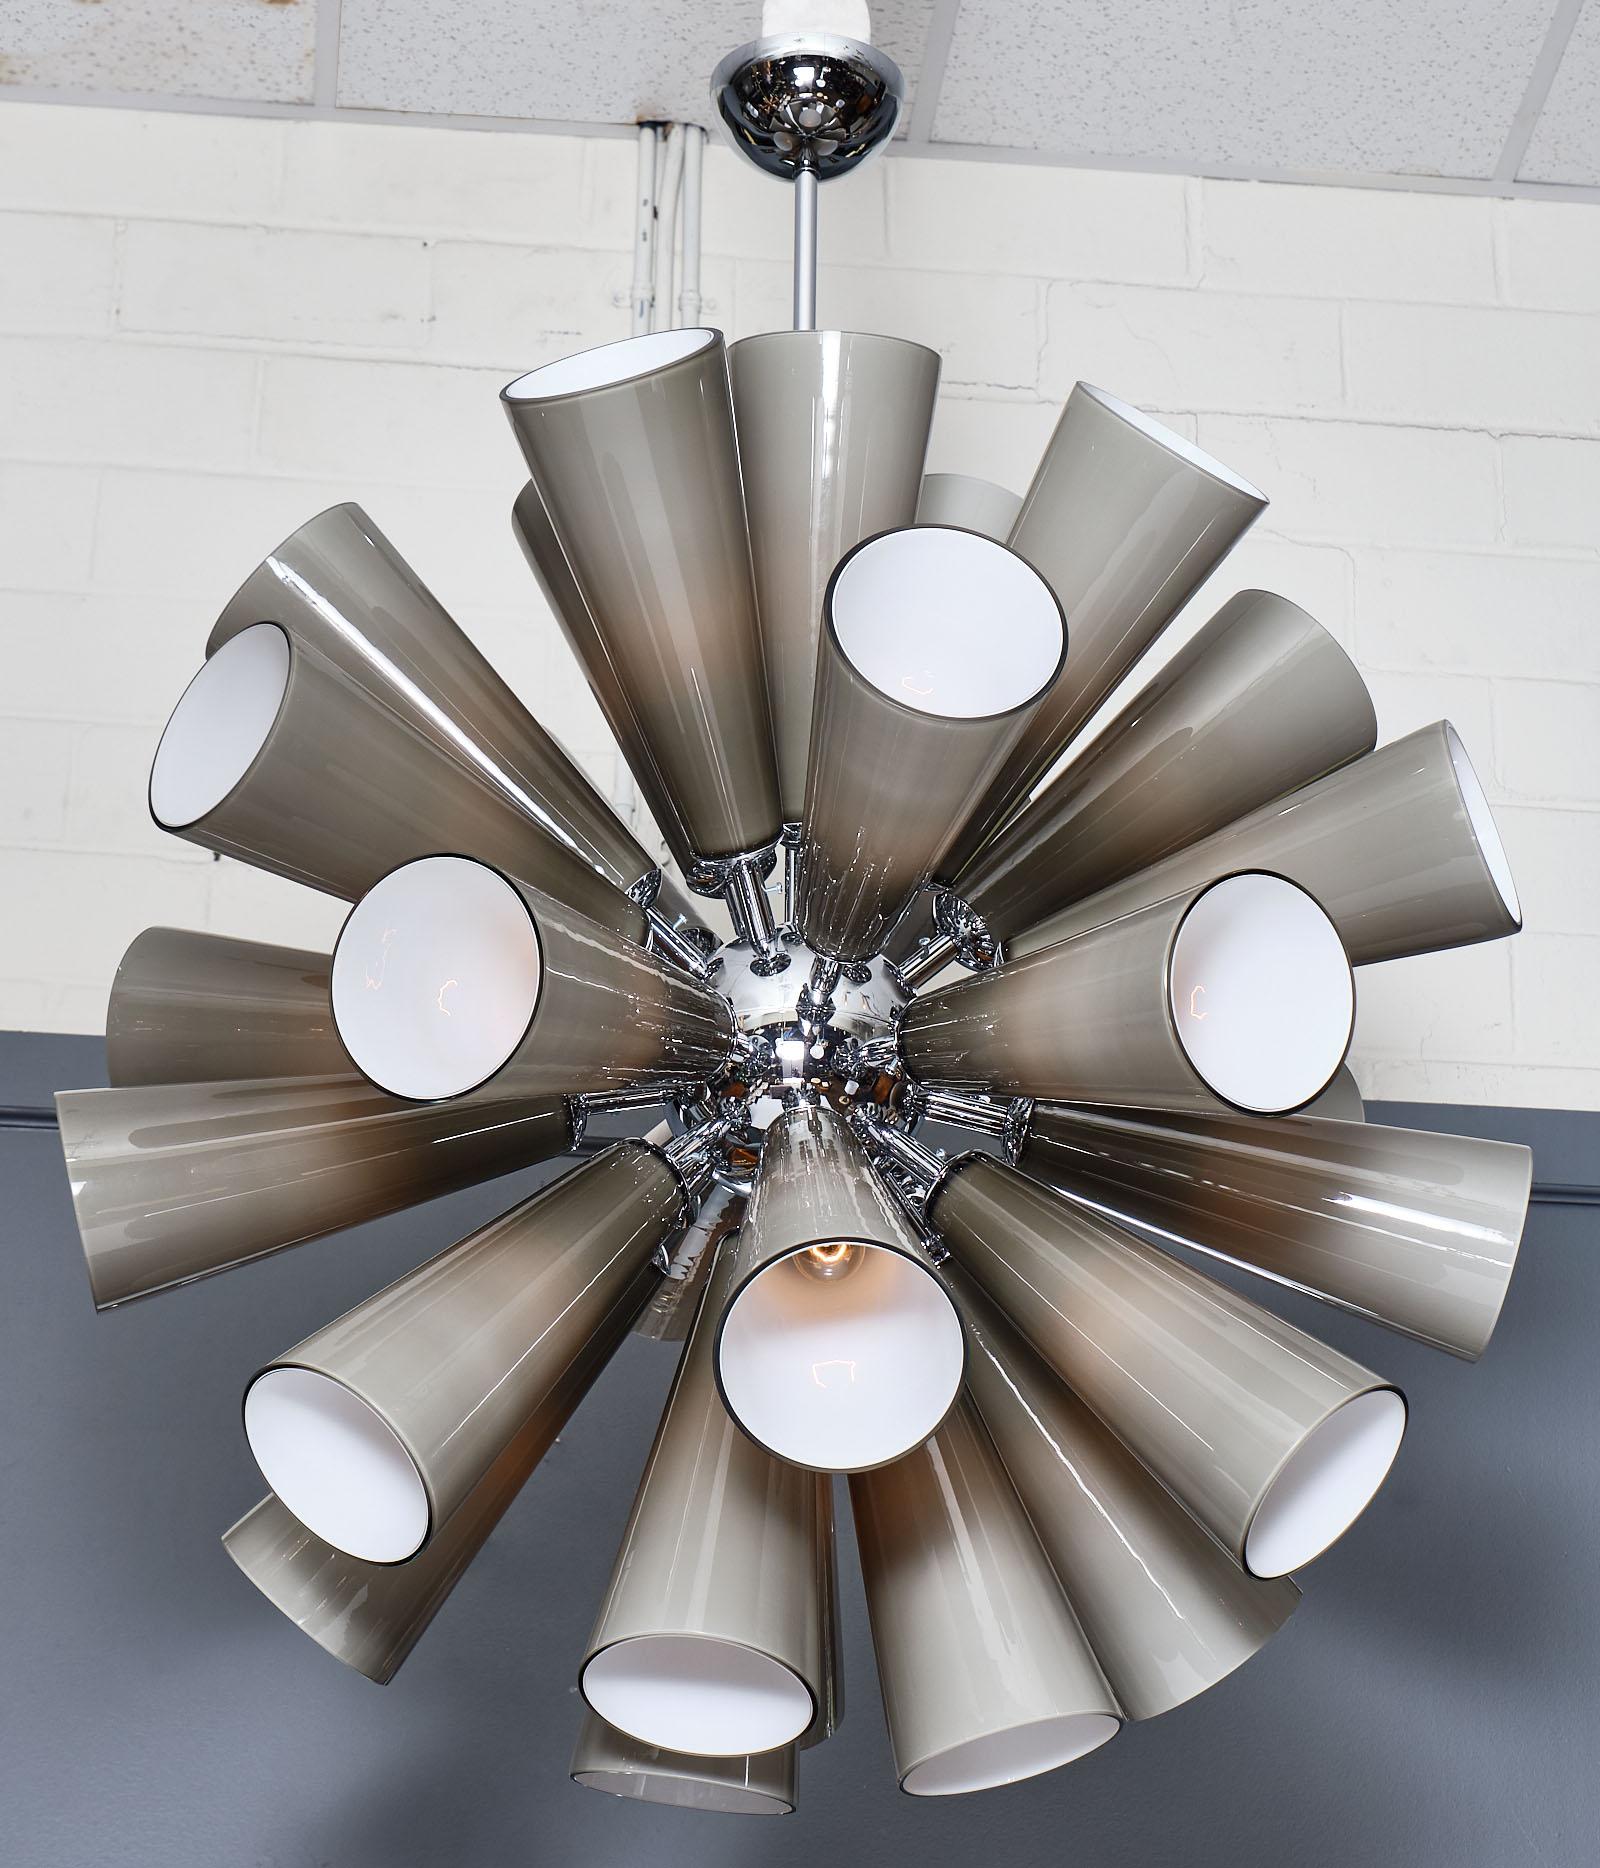 Murano glass gray sputnik chandelier featuring multiple blown glass components in conic shapes. Each glass piece has a double layer of white glass inside and gray outside, which gives the fixture a very smooth glow. The structure is chrome and has